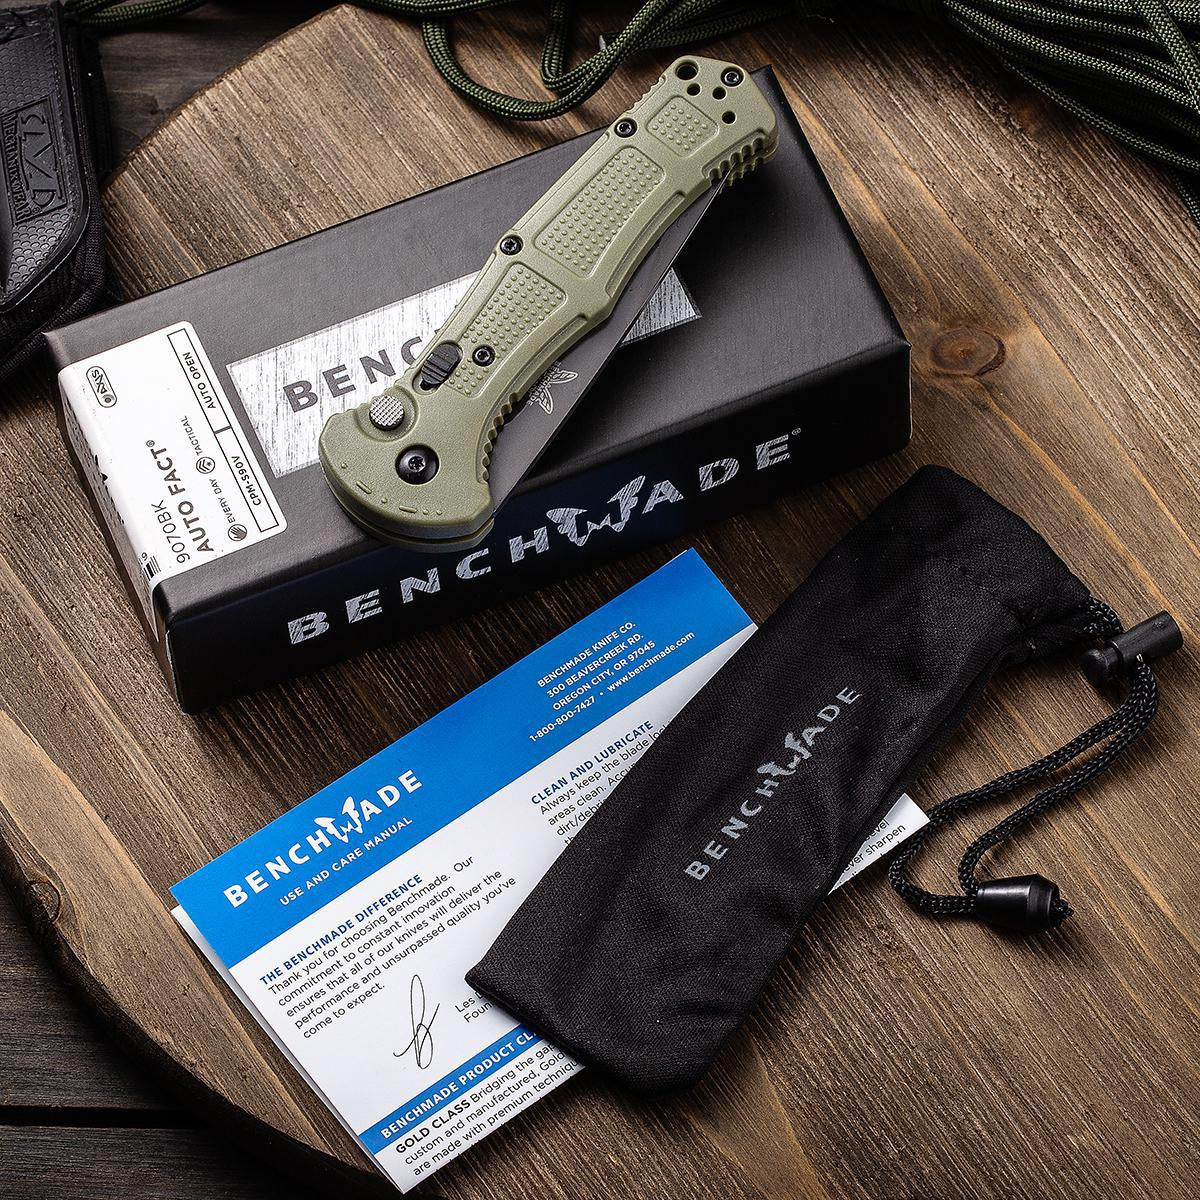 New Benchmade 9070SBK Claymore automatic folding knife CPM-D2 steel bladed portable hunting knife Outdoor survival rescue knife